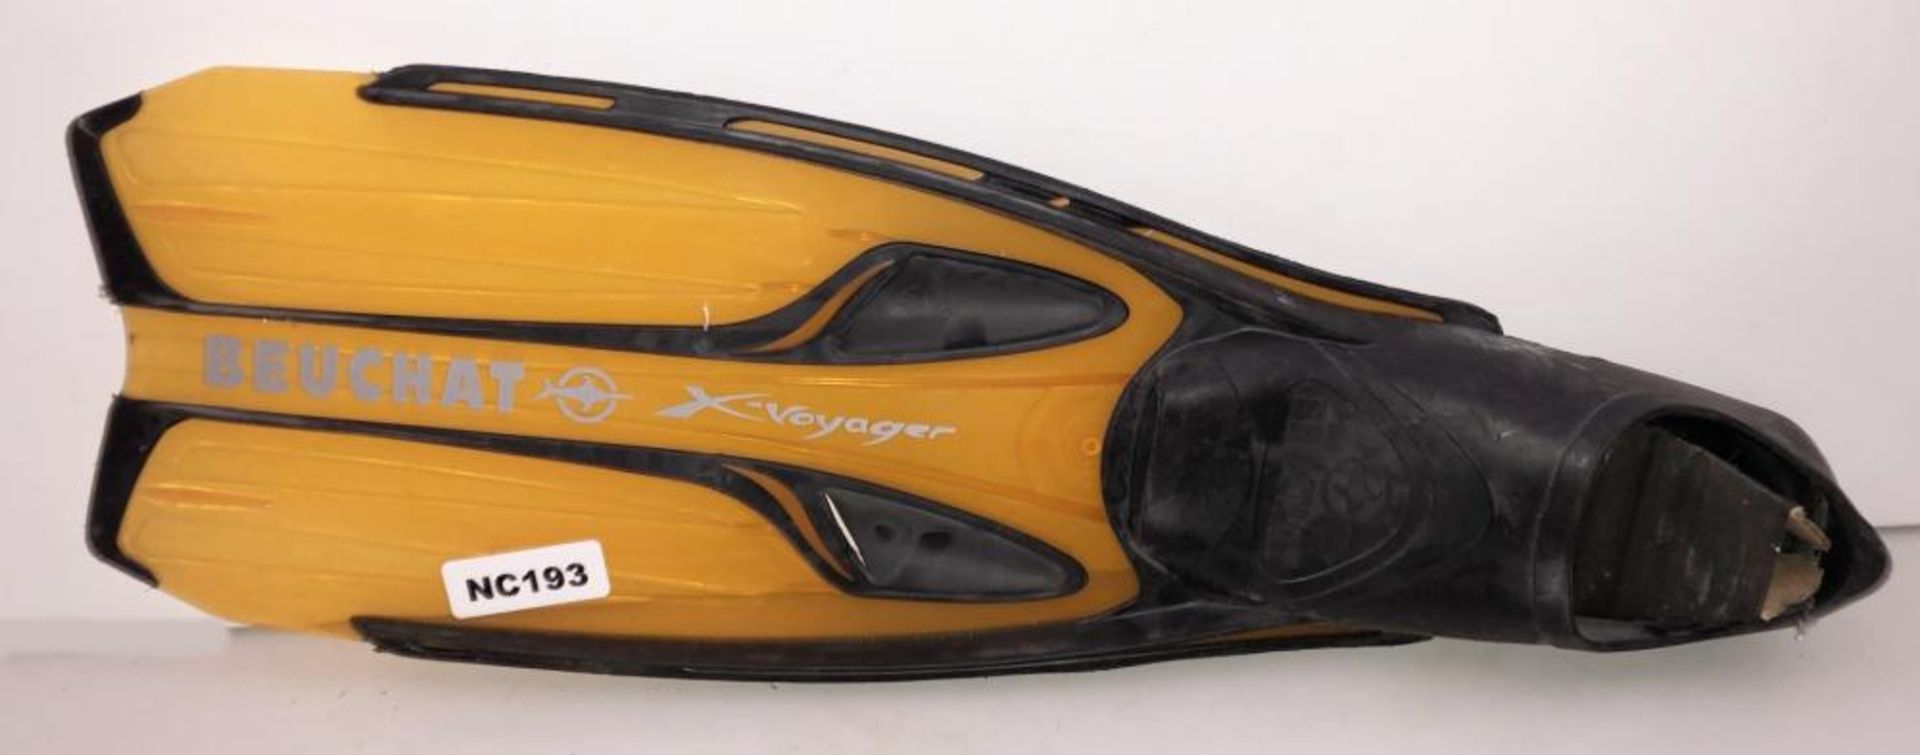 A Pair Of Beuchat X-Voyager Diving Fins In Orange - Ref: NC193, NC194 - CL349 - Location: Altrincham - Image 2 of 7